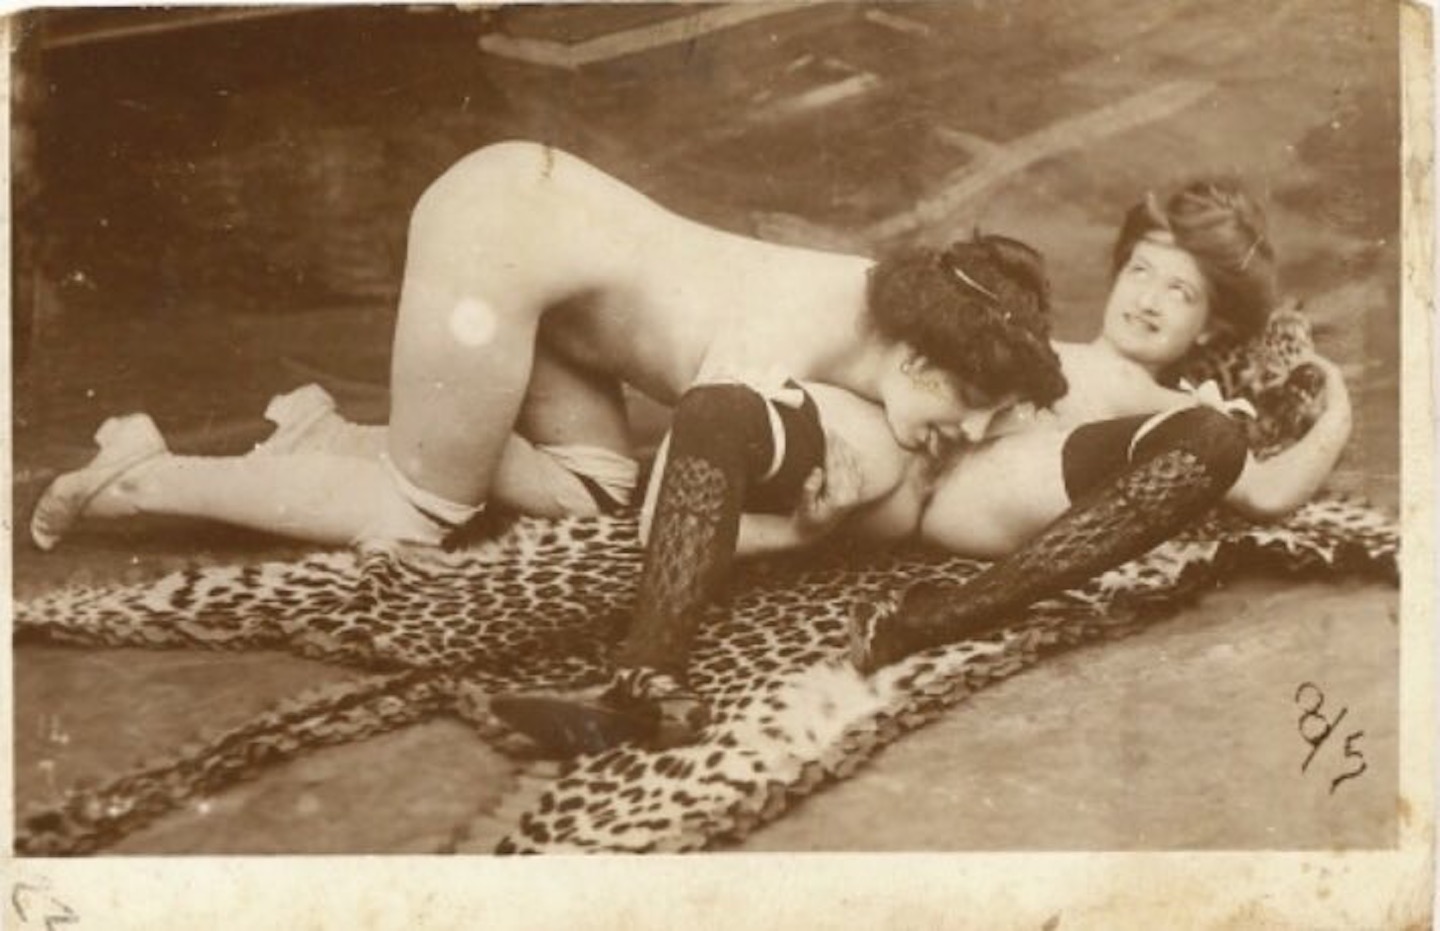 Porn From The 1800s - The Unbridled Joy of Victorian Porn - VICE